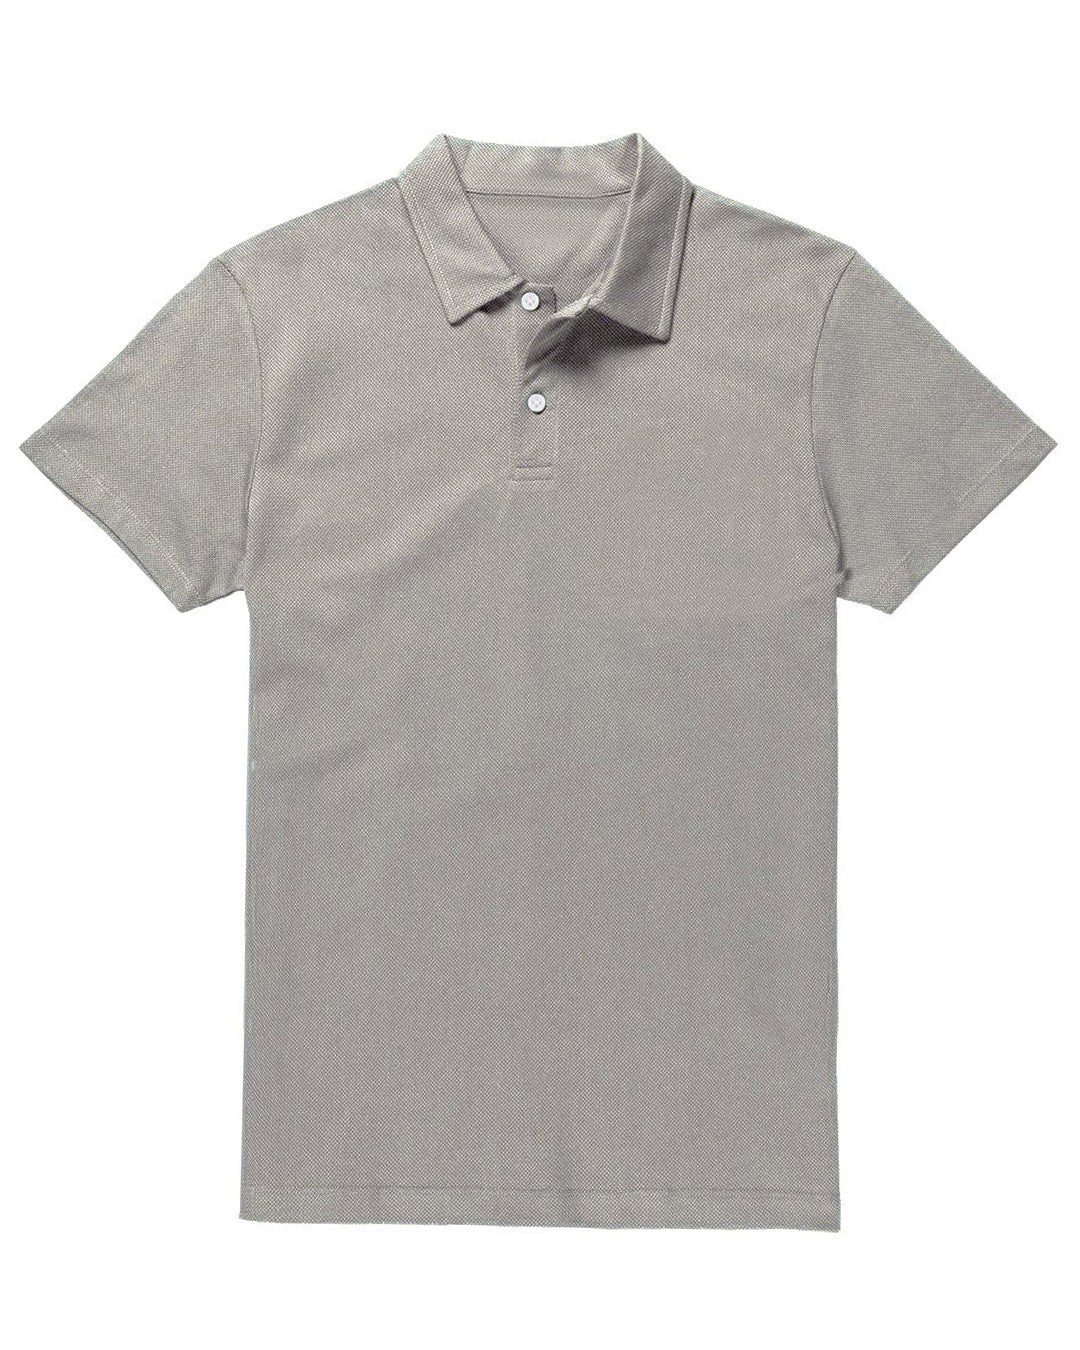 Front of the custom oxford polo shirt for men by Luxire in grey